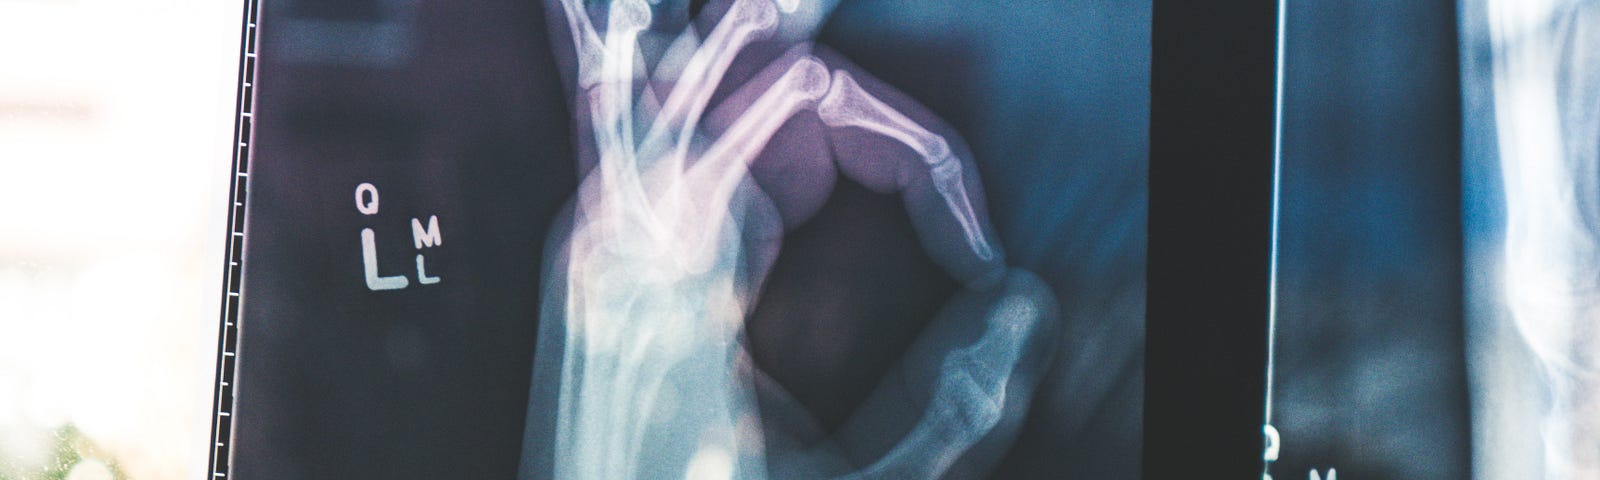 An x-ray of a hand doing the “okay” sign